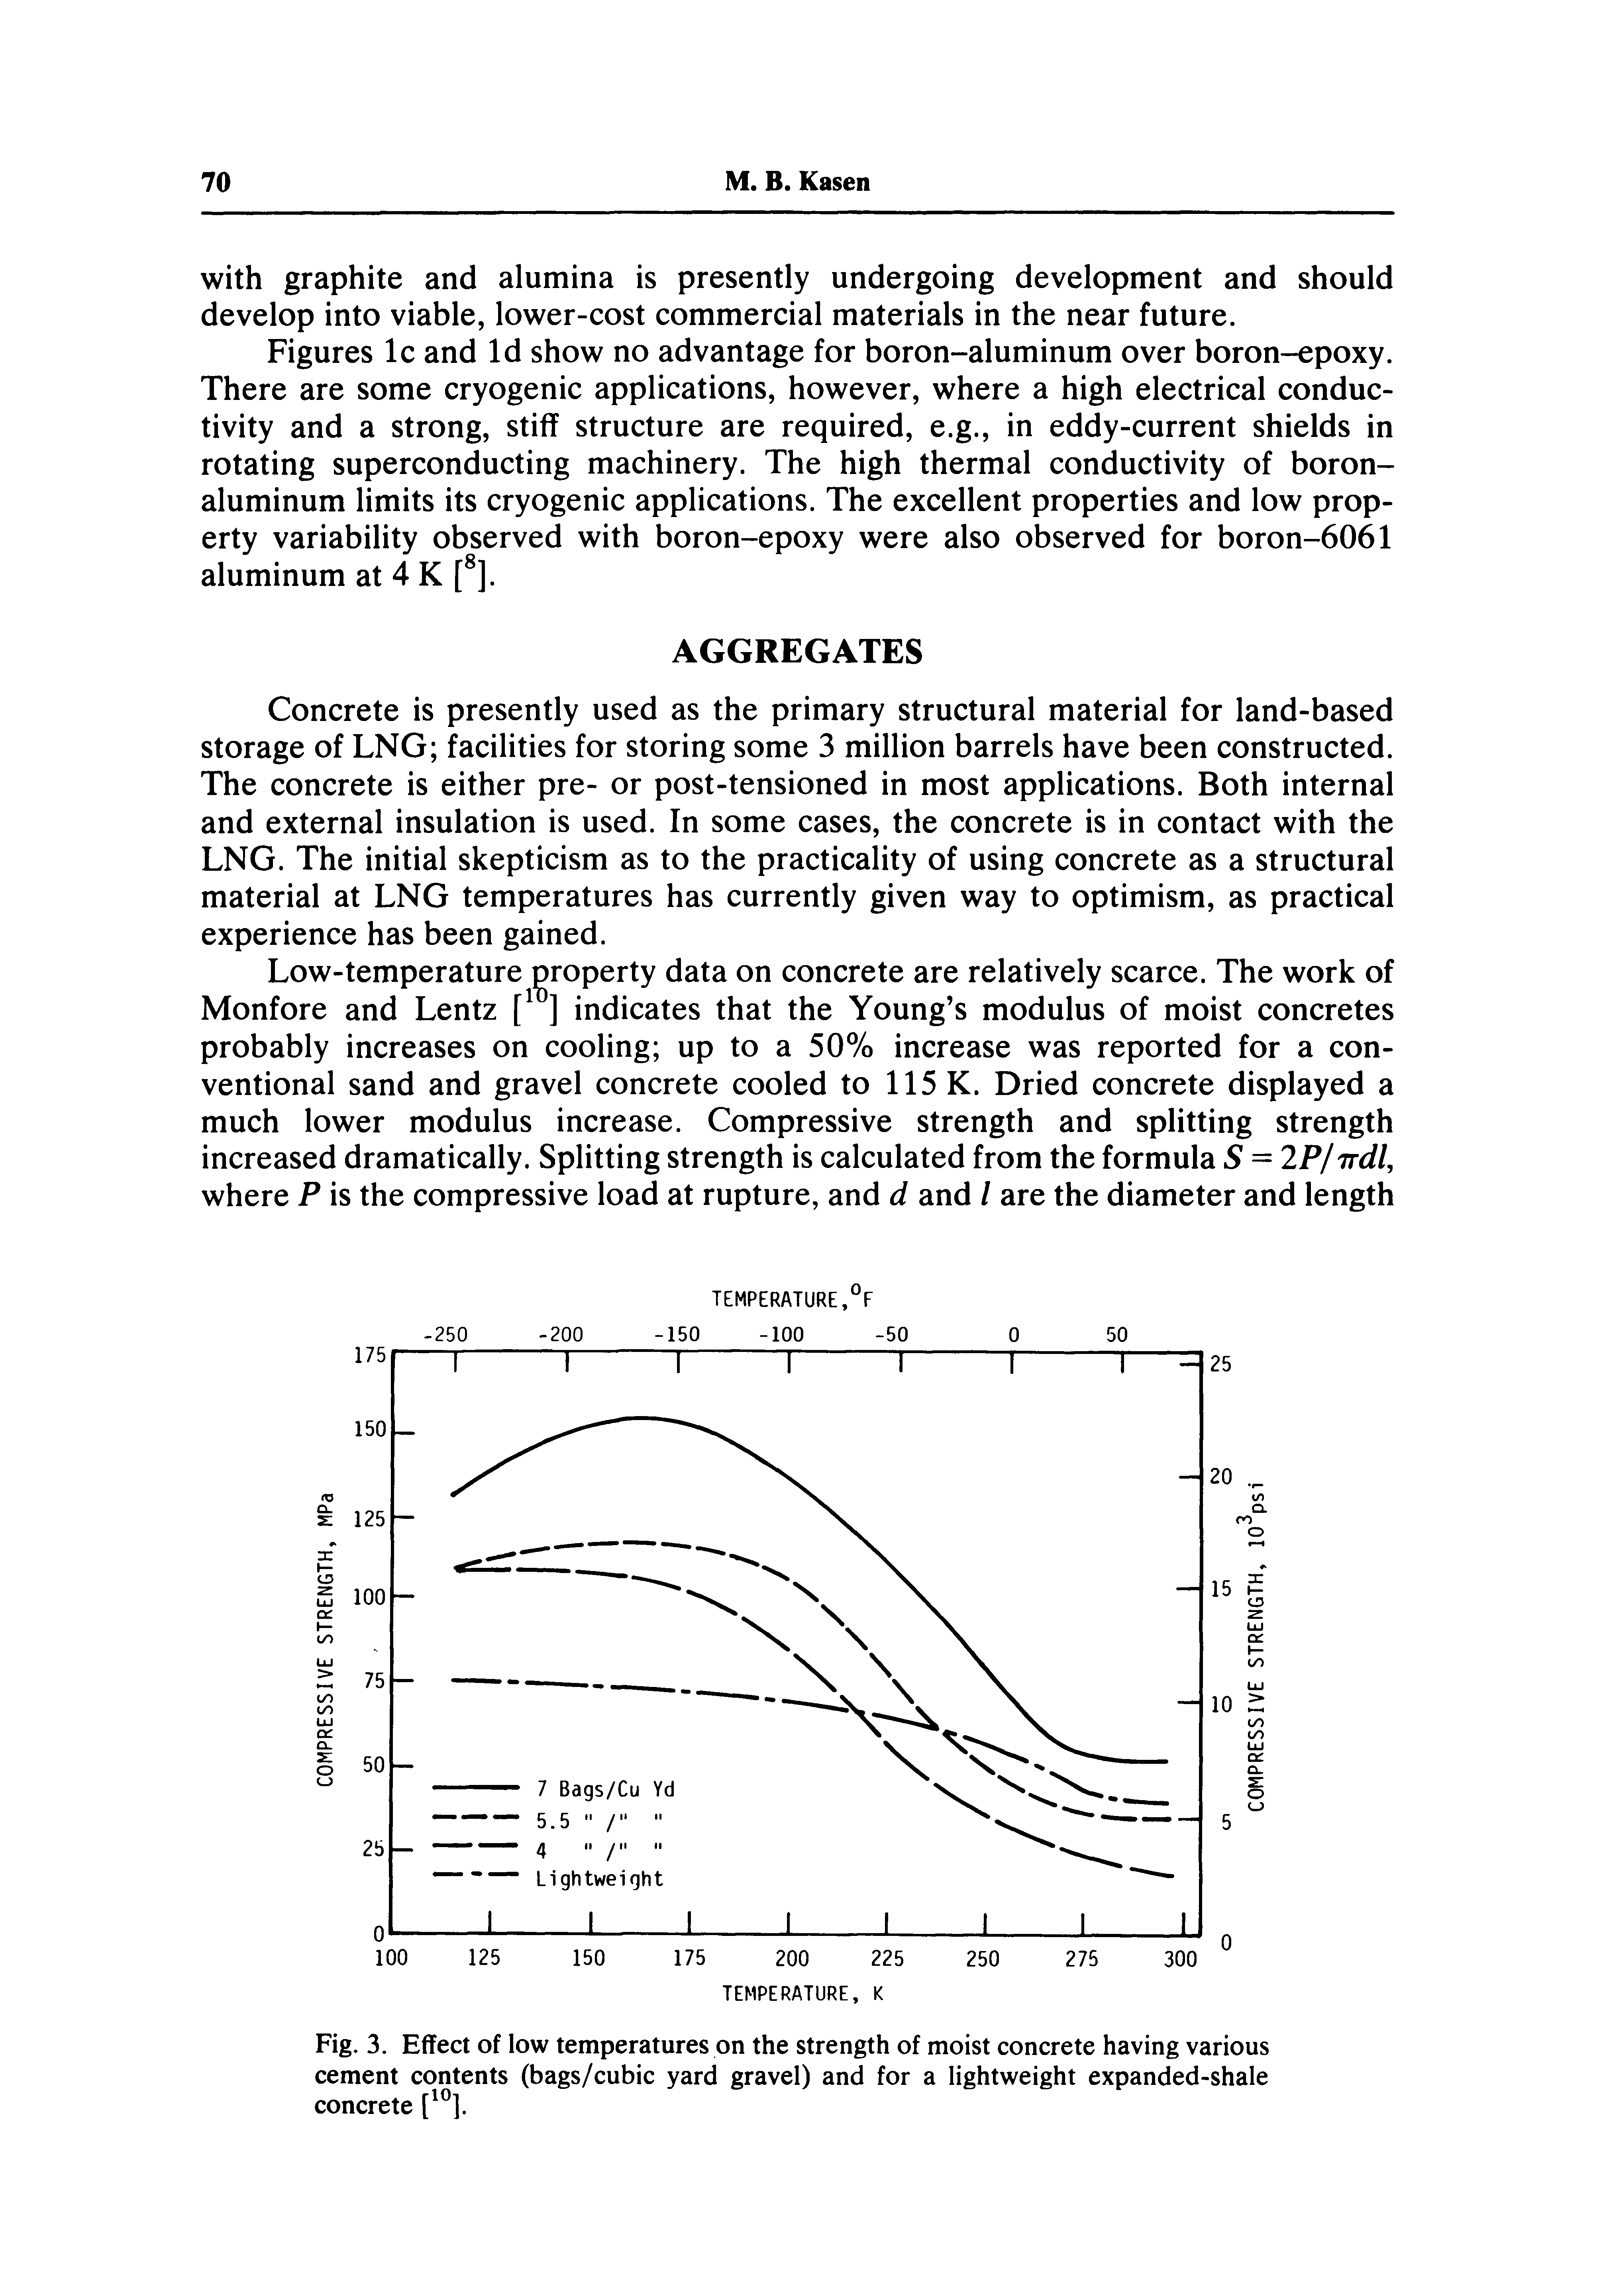 Figures Ic and Id show no advantage for boron-aluminum over boron-epoxy. There are some cryogenic applications, however, where a high electrical conductivity and a strong, stiff structure are required, e.g., in eddy-current shields in rotating superconducting machinery. The high thermal conductivity of boron-aluminum limits its cryogenic applications. The excellent properties and low property variability observed with boron-epoxy were also observed for boron-6061 aluminum at 4 K [ ].